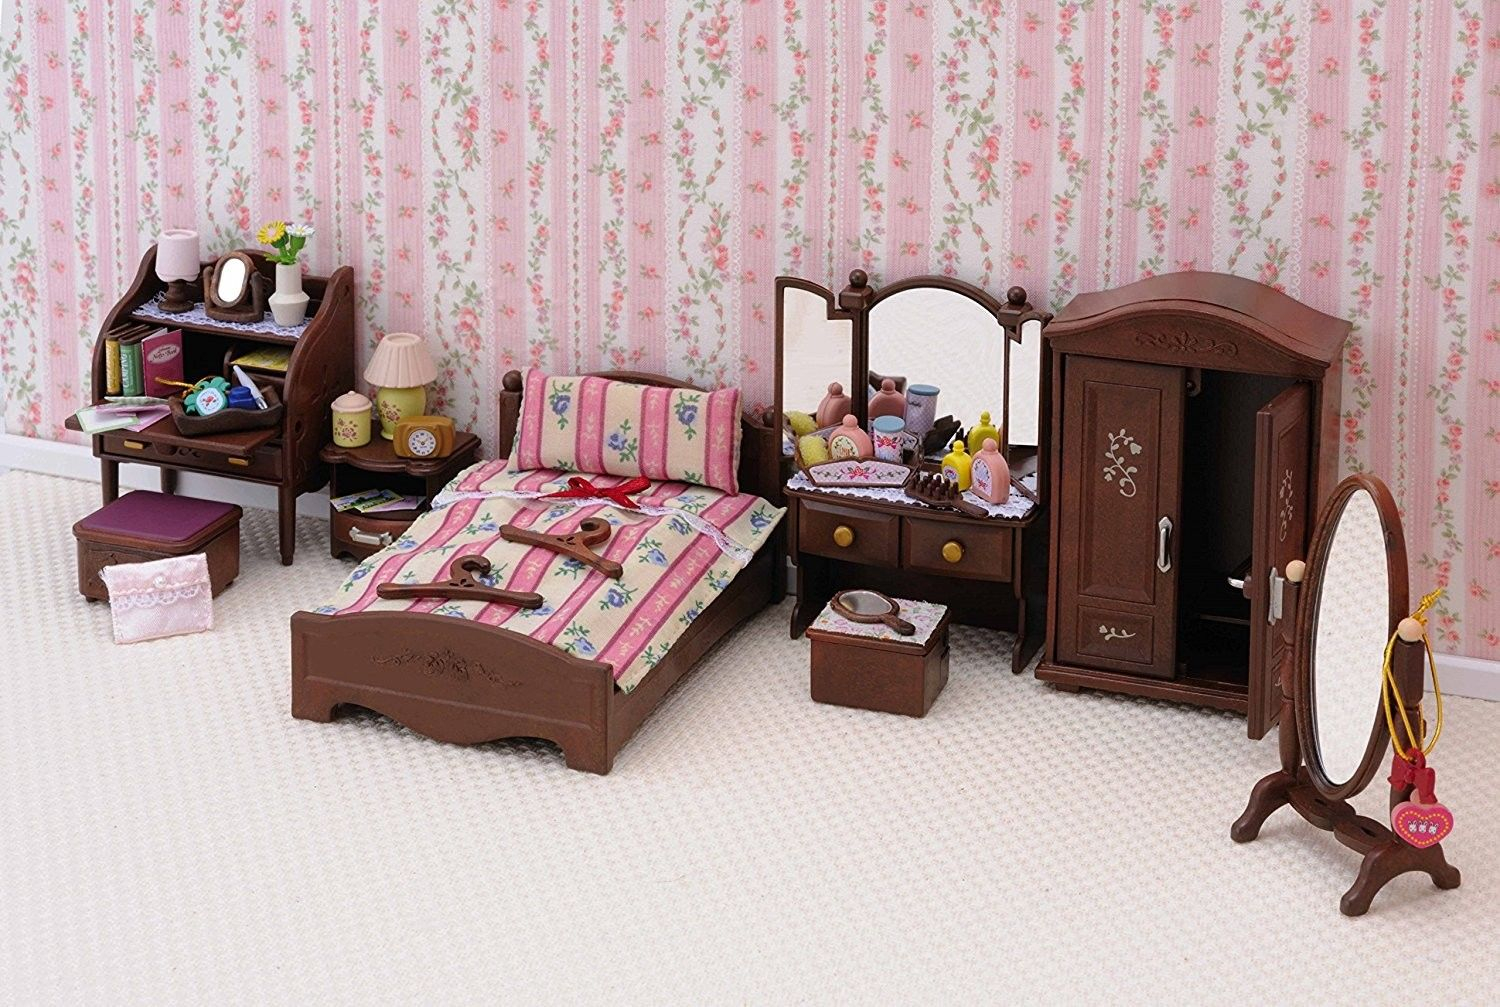 Luxury Master Bedroom Furniture Set Sylvanian Families Europe throughout dimensions 1500 X 1007